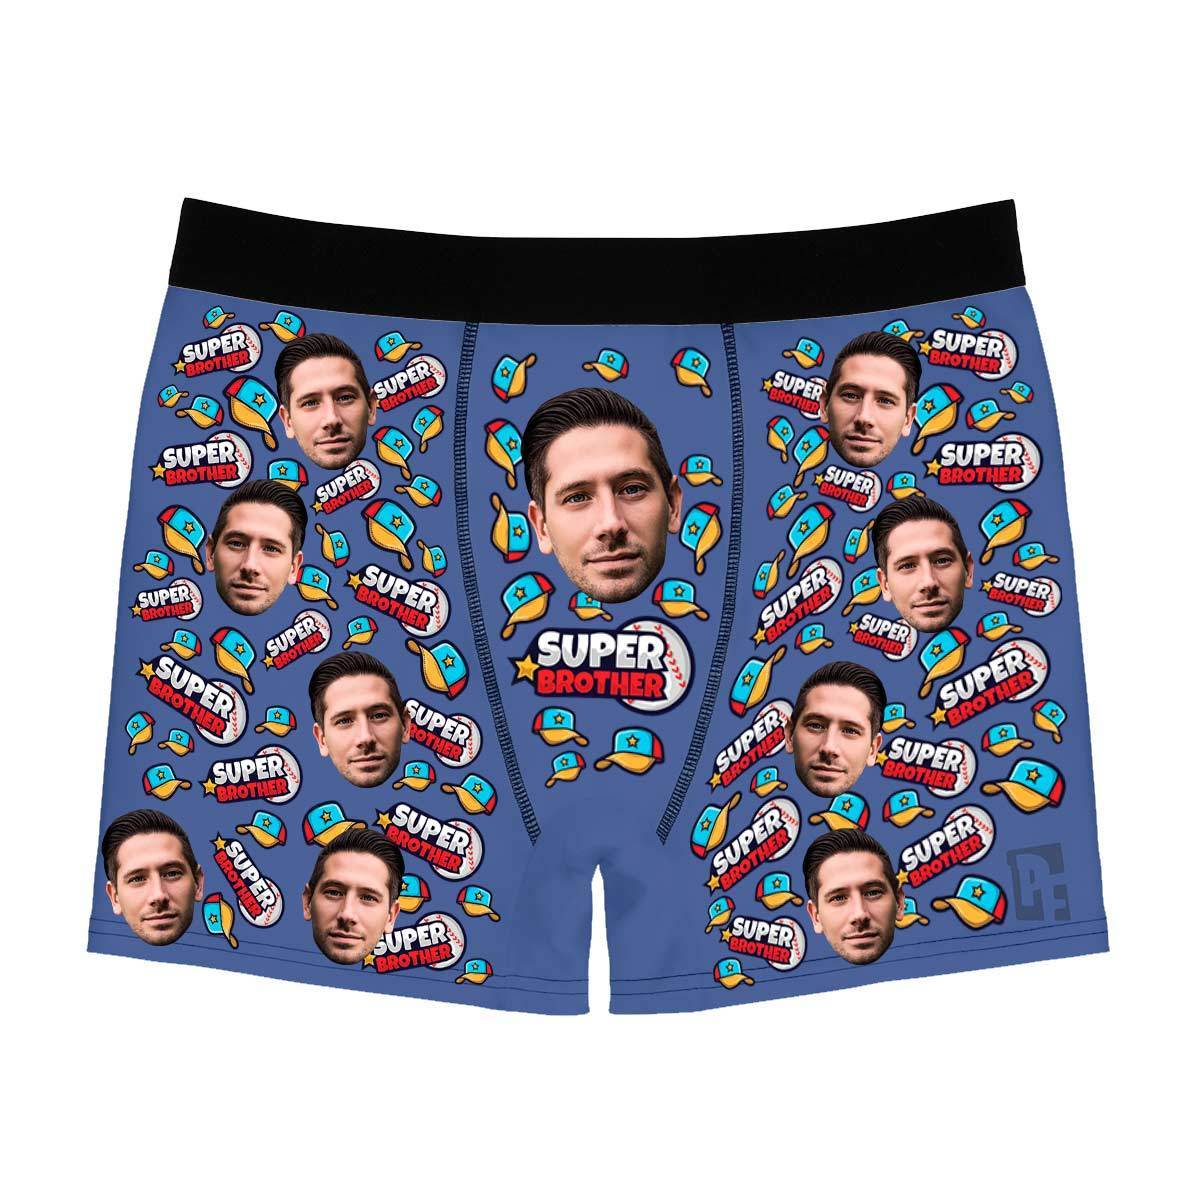 Darkblue Super Brother men's boxer briefs personalized with photo printed on them